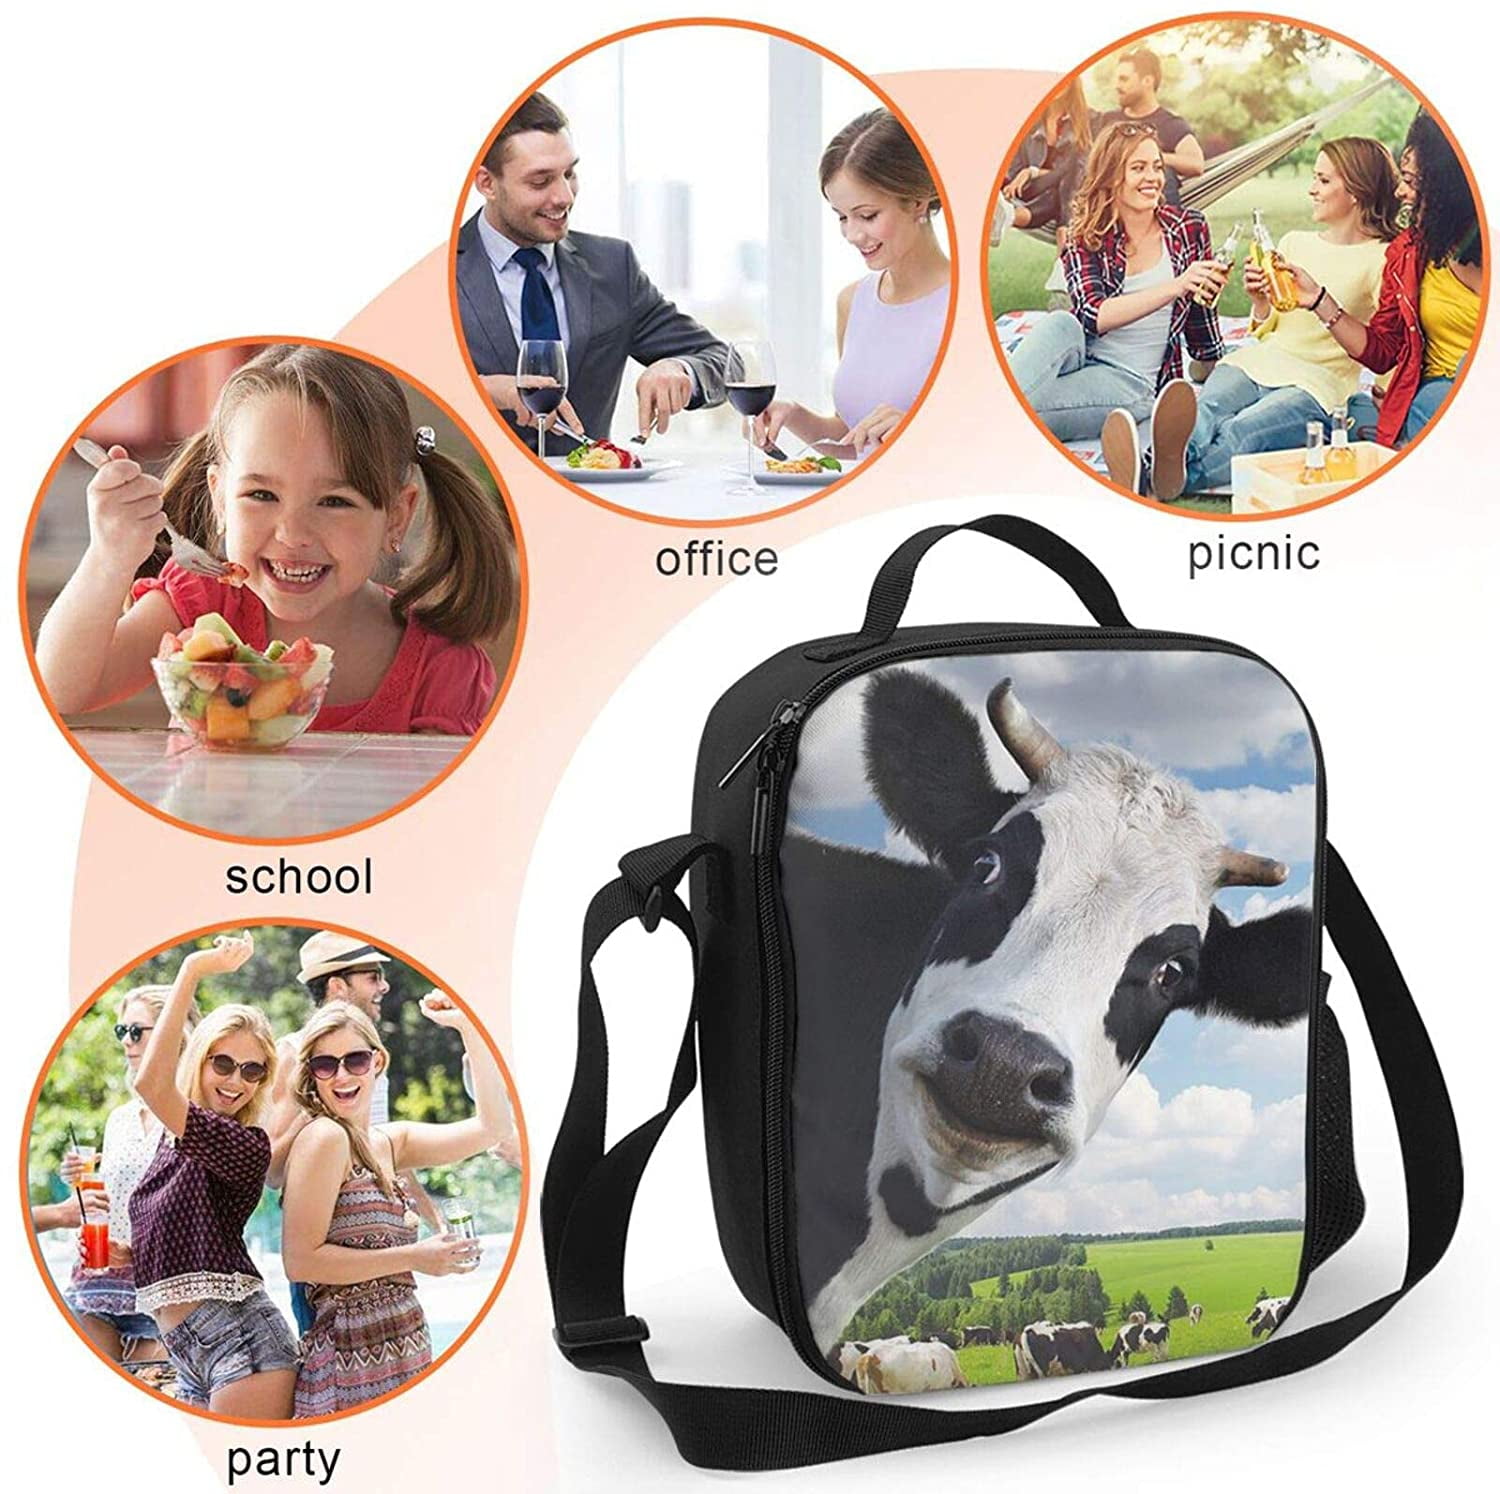 Outdoor Picnic Lunch Bag Lunch Bag For Kids Insulated Lunch Box Snack Box  With Strap And Side Mesh Pocket For Boys Girls - Diy Apparel & Needlework  Storage - AliExpress